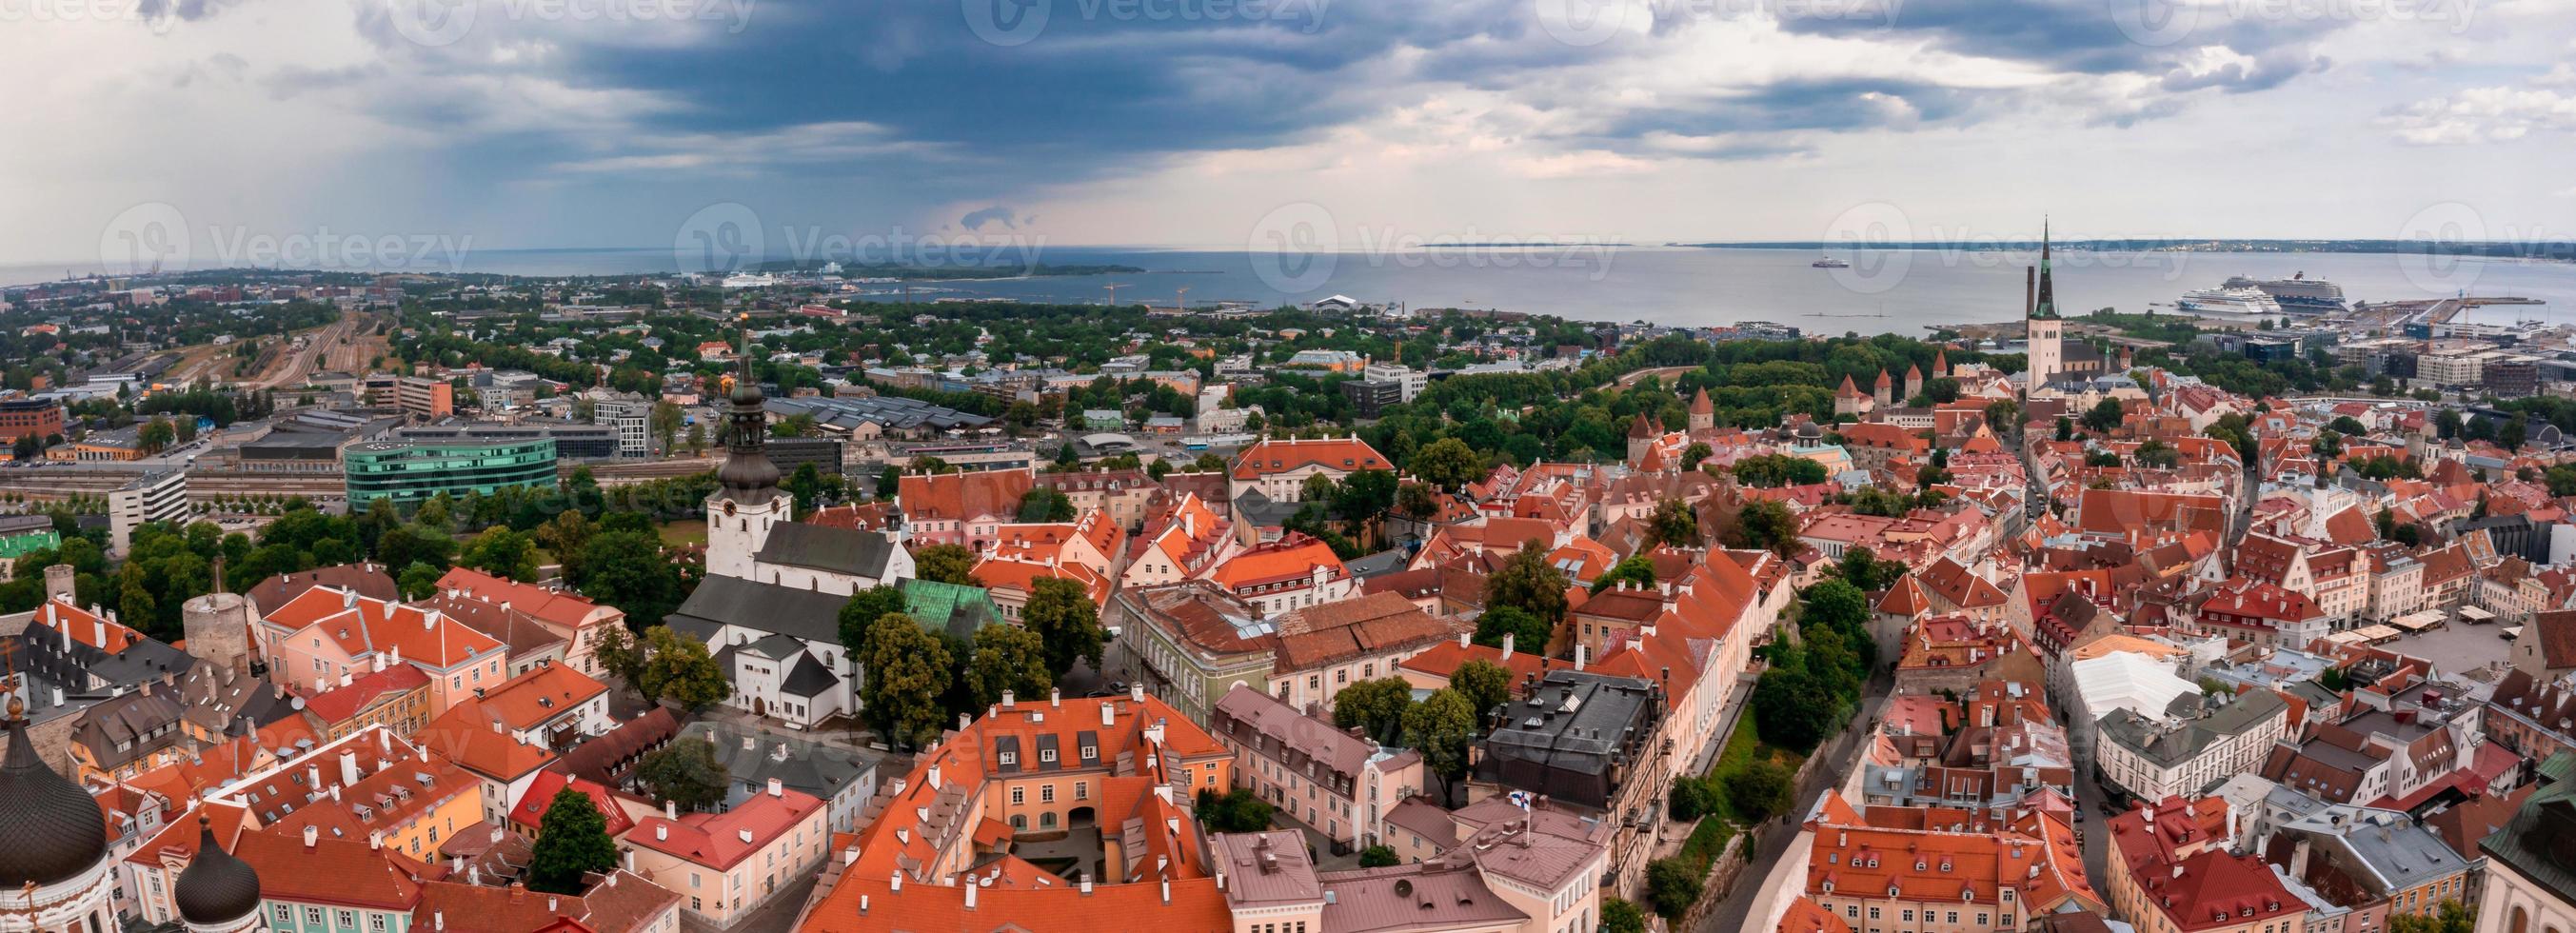 Aerial View of Tallinn Old Town in a beautiful summer day photo